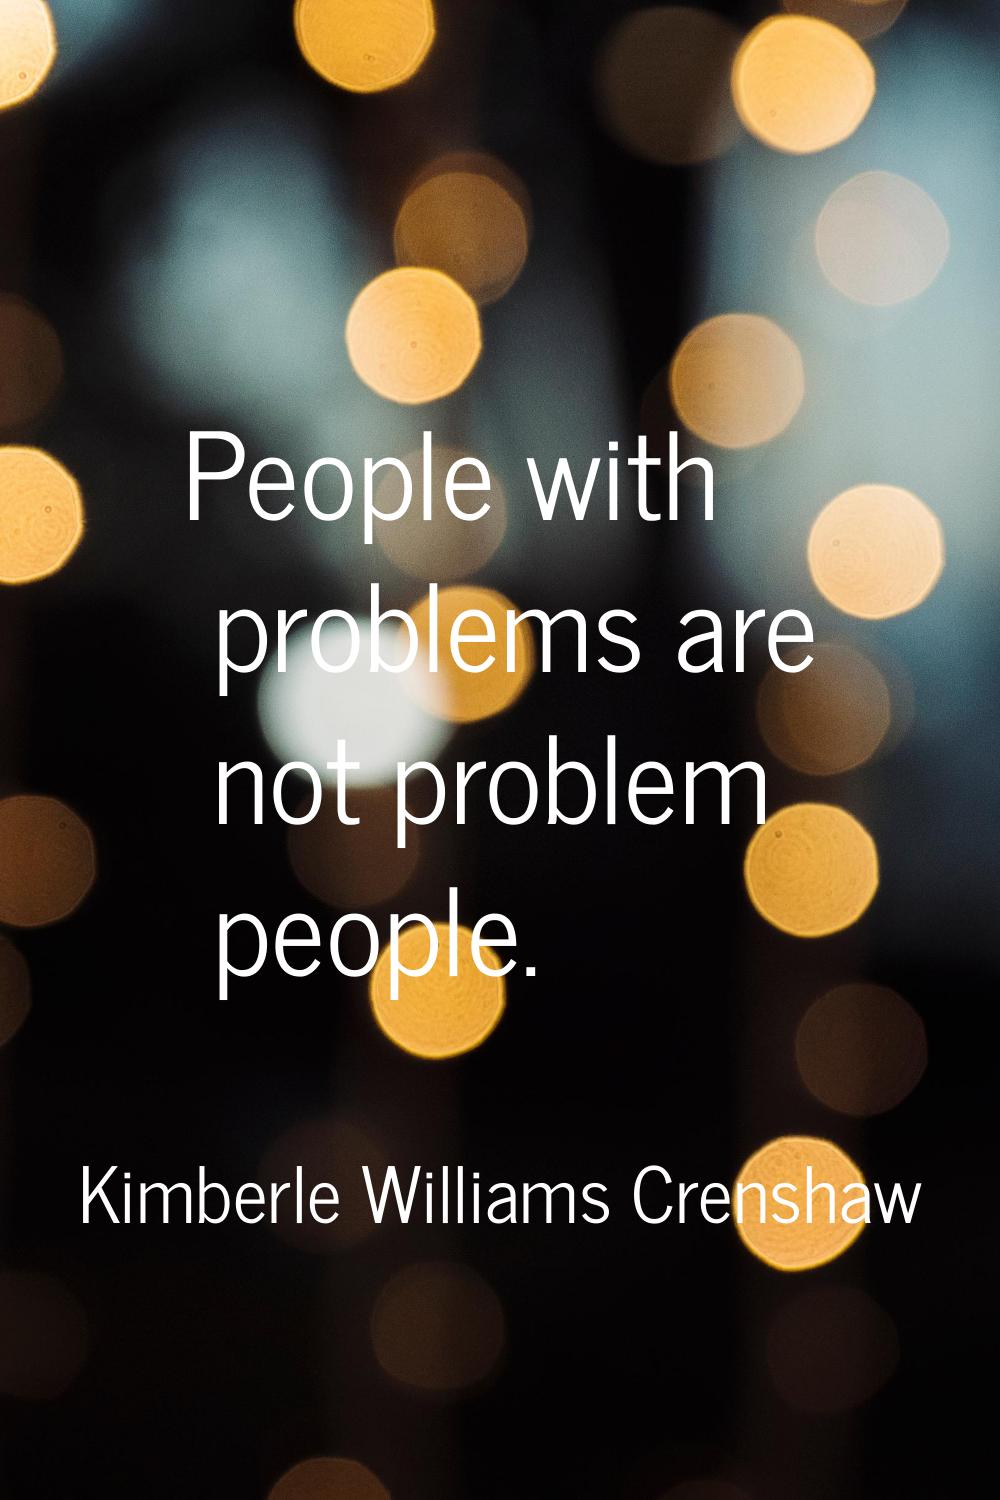 People with problems are not problem people.